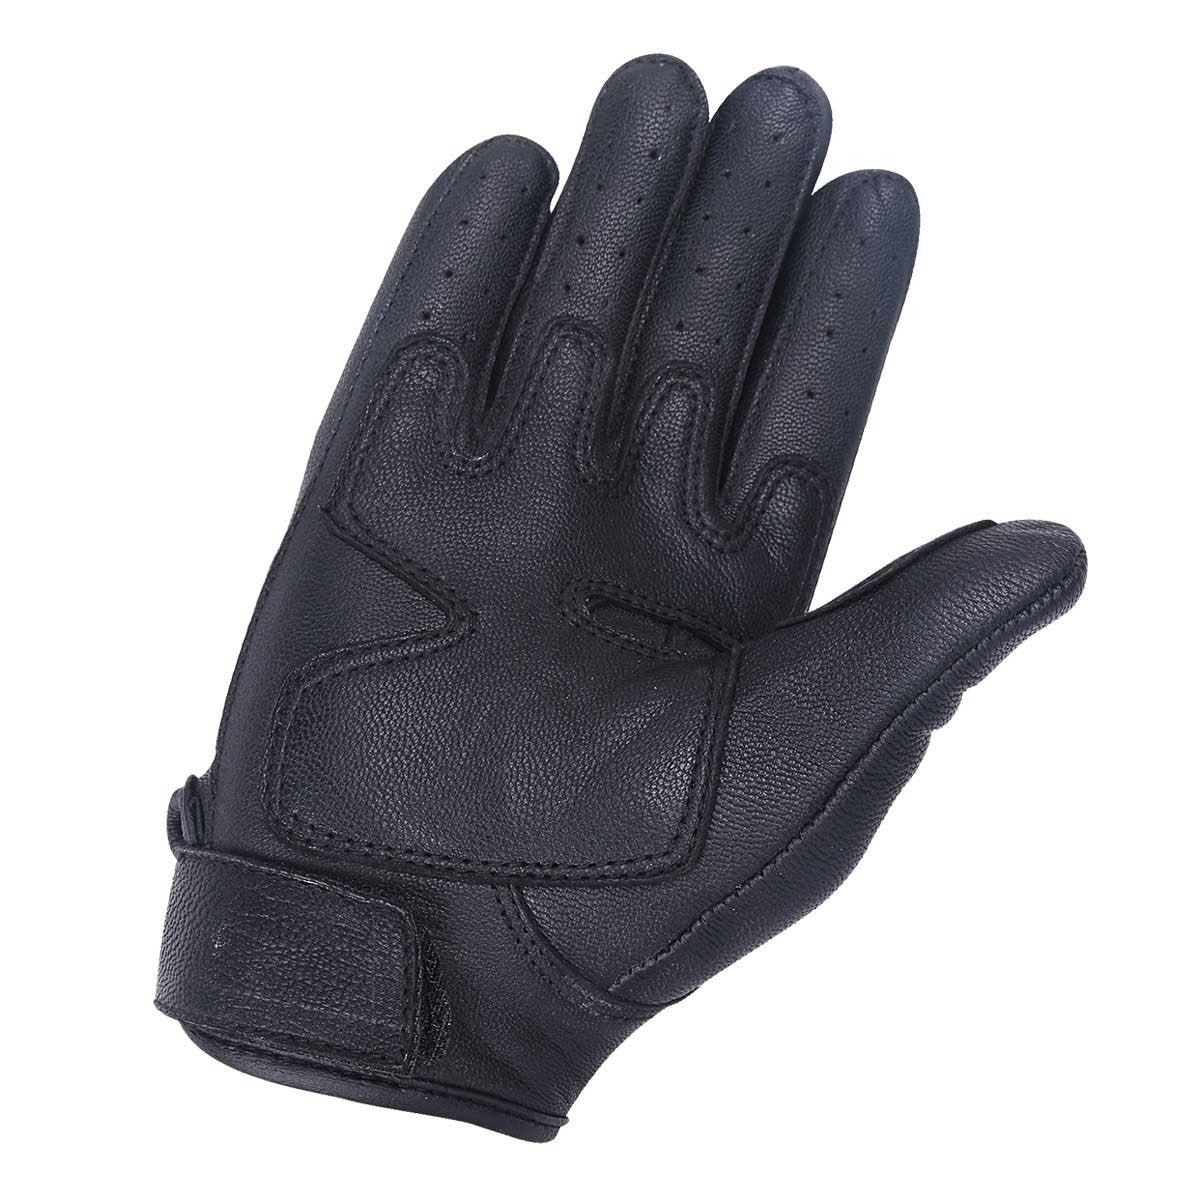 Vance Leather Armored Knuckle Riding Gloves